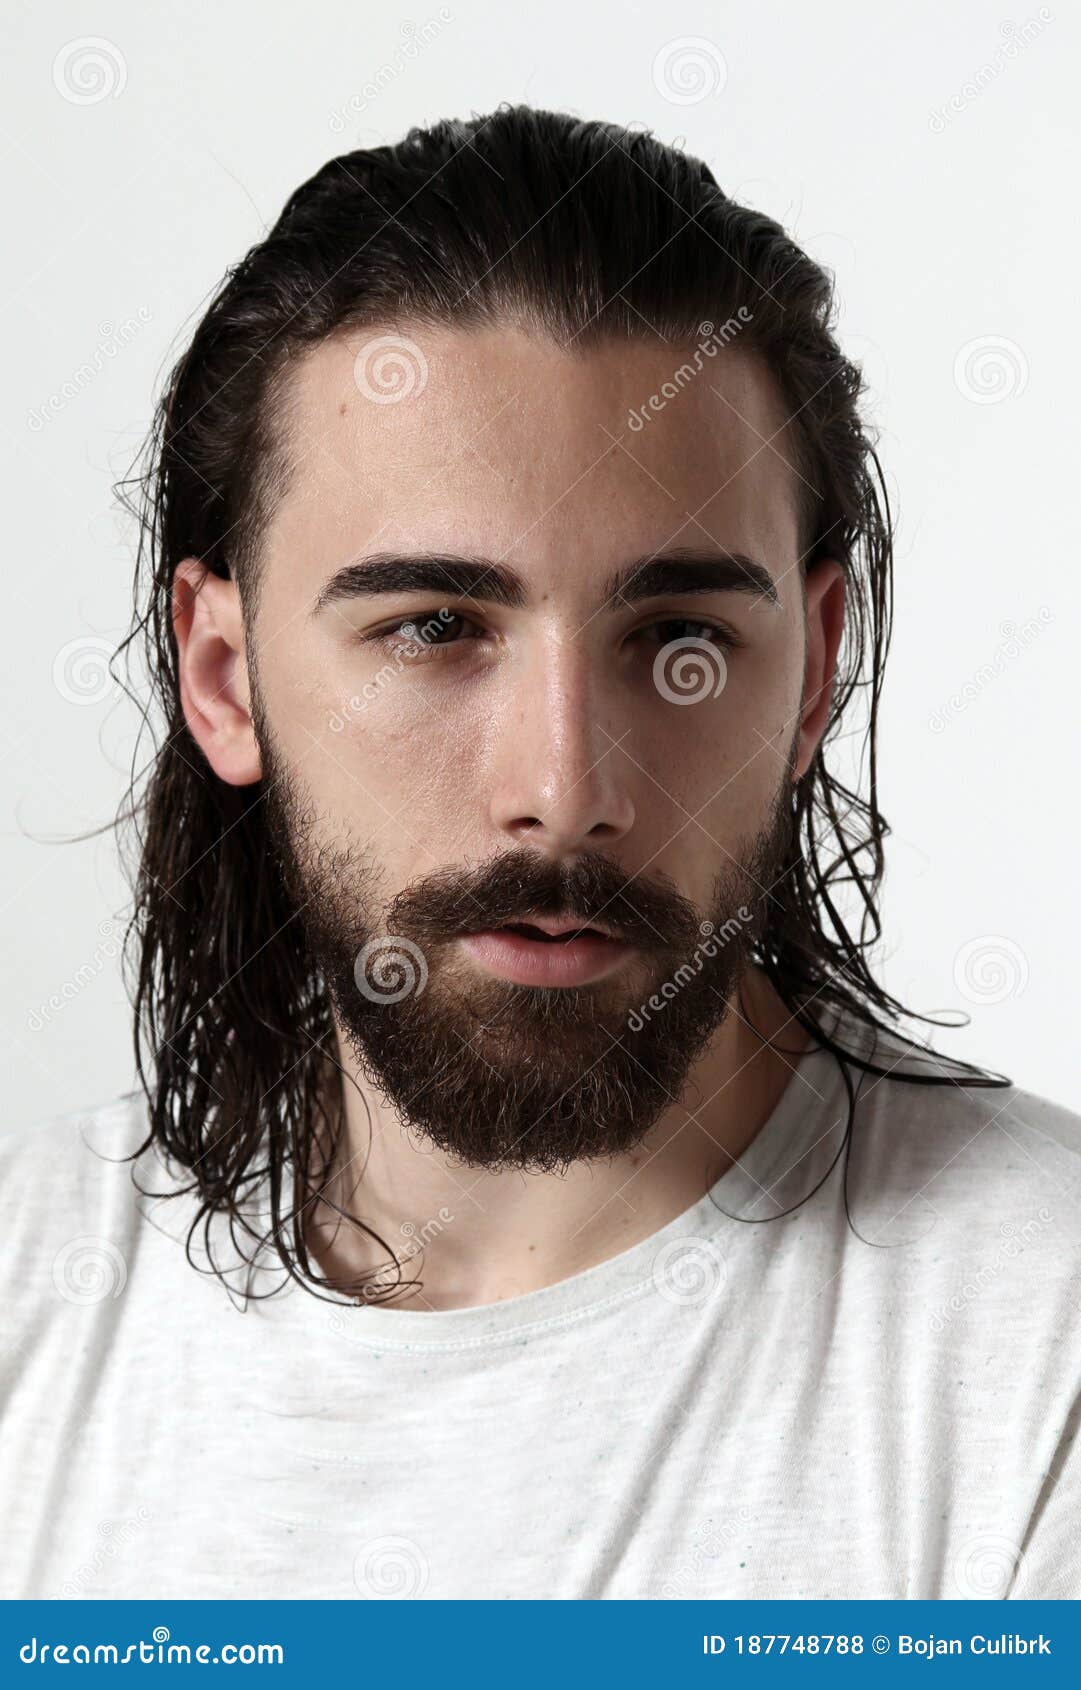 Attractive Male Model with Long Hair and Beard Posing in Studio on ...